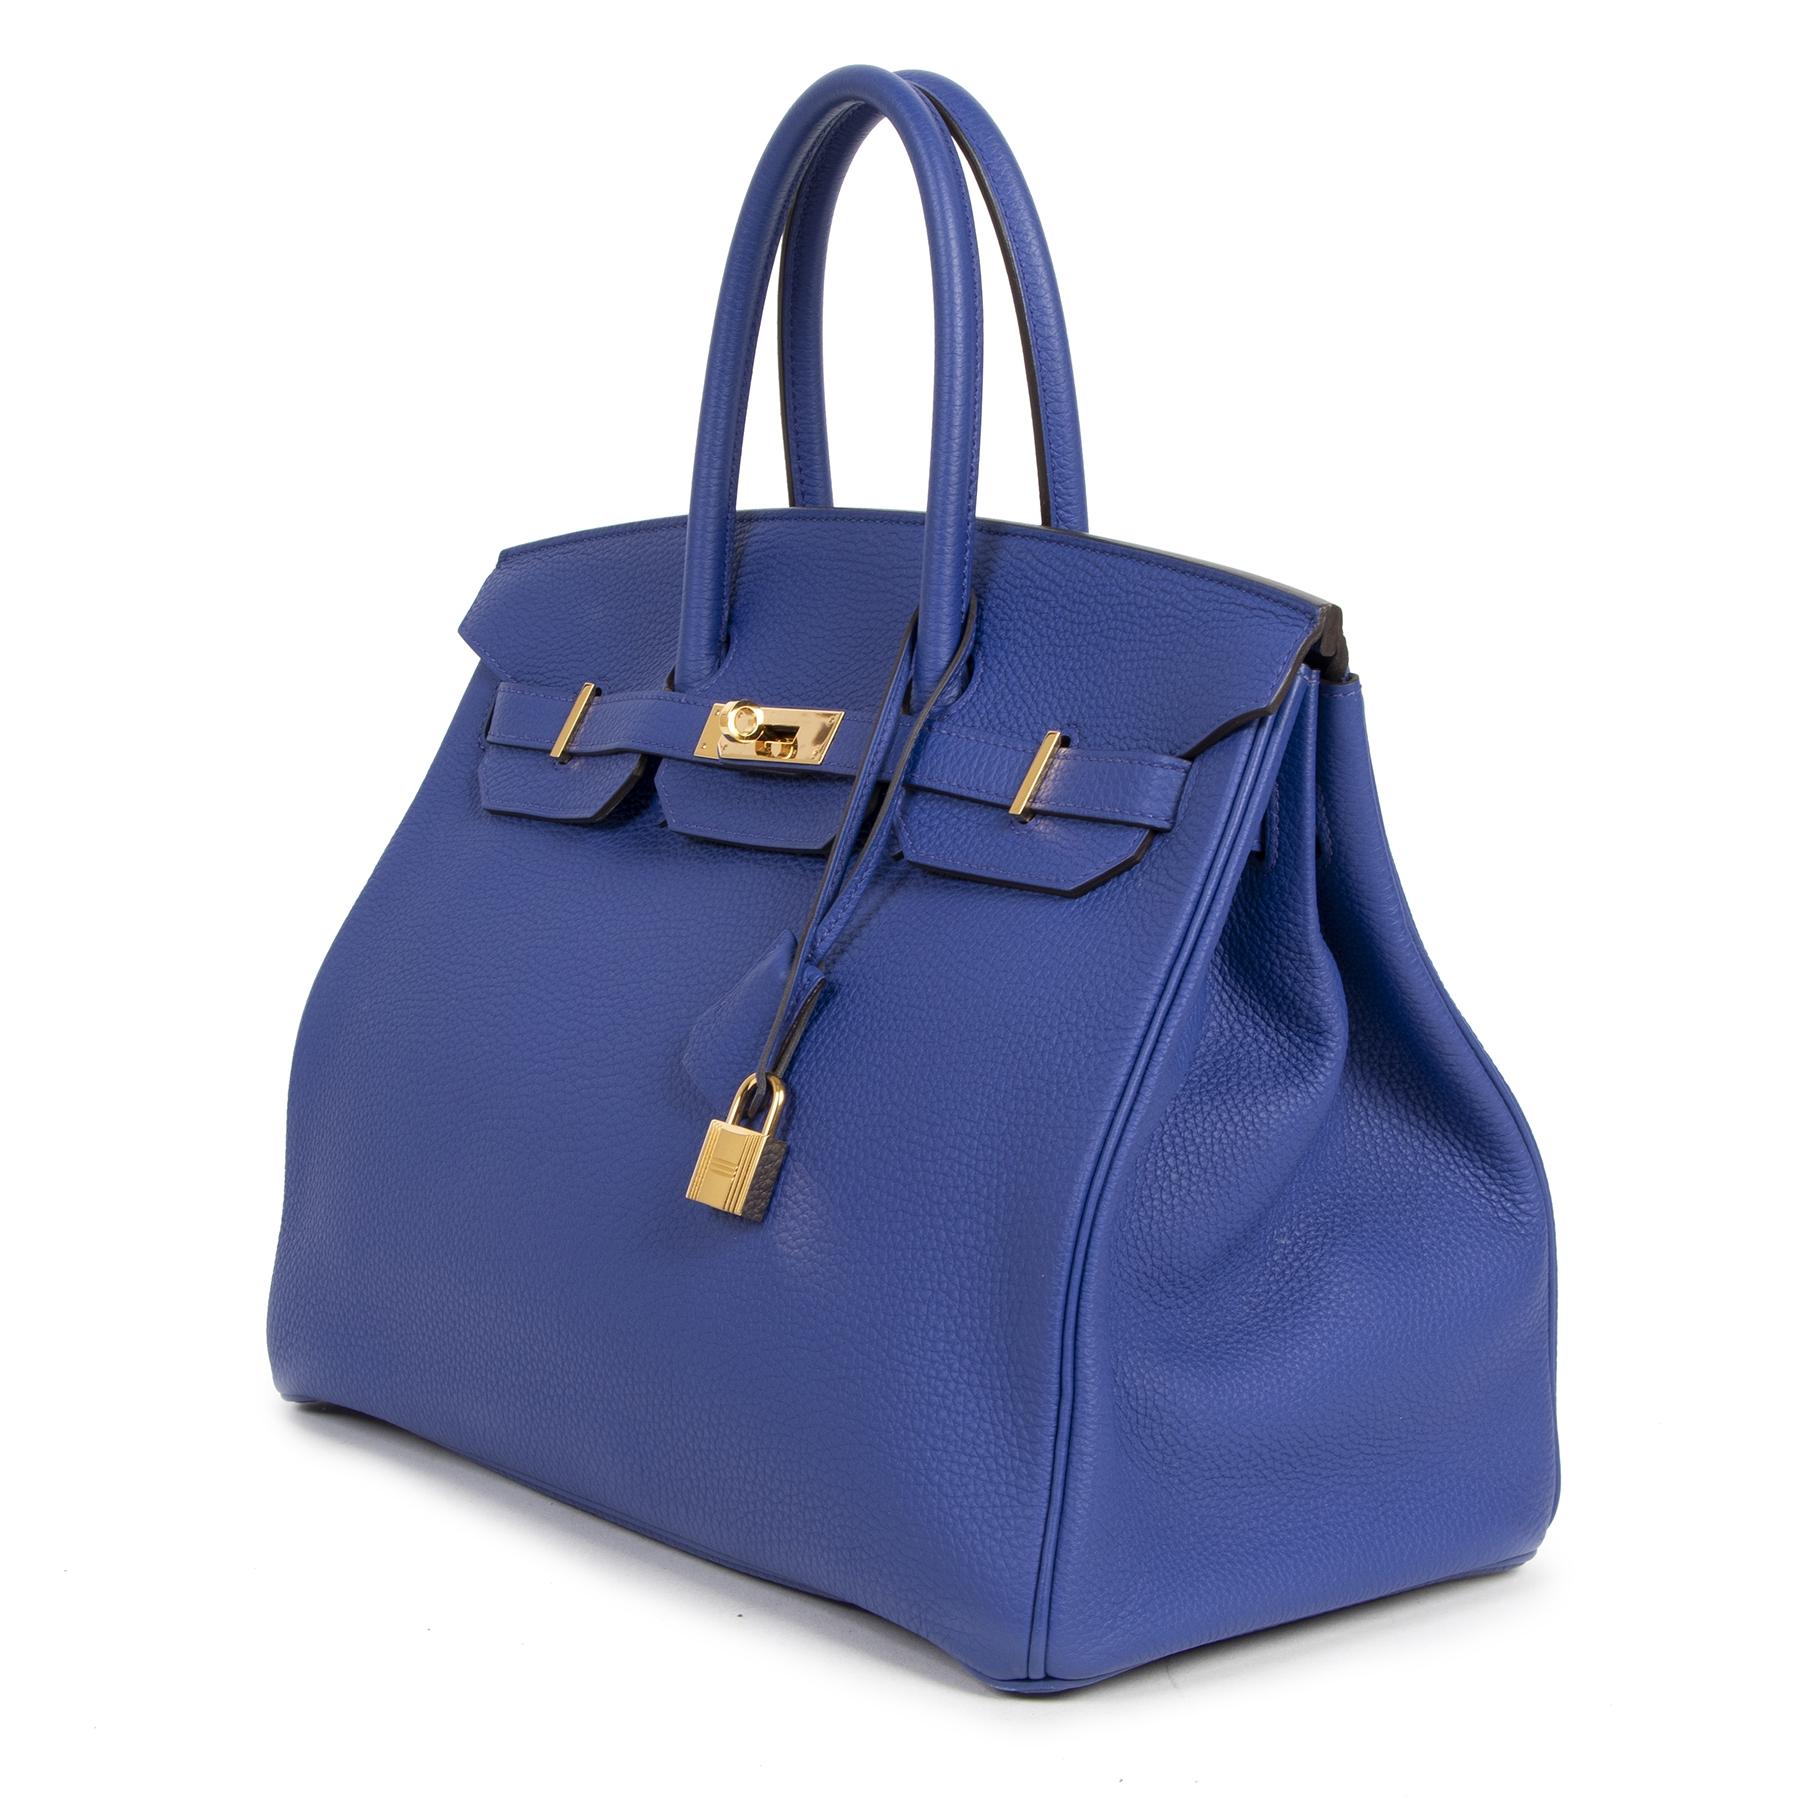 As New

As New Hermes Birkin 35 Blue Electrique GHW

Get your hands on this amazingly gorgeous Birkin bag by Hermès.
The very hard to find and hot Blue Electrique is a real brilliant pop of blue and is remarkably wearable with nearly everything.
The